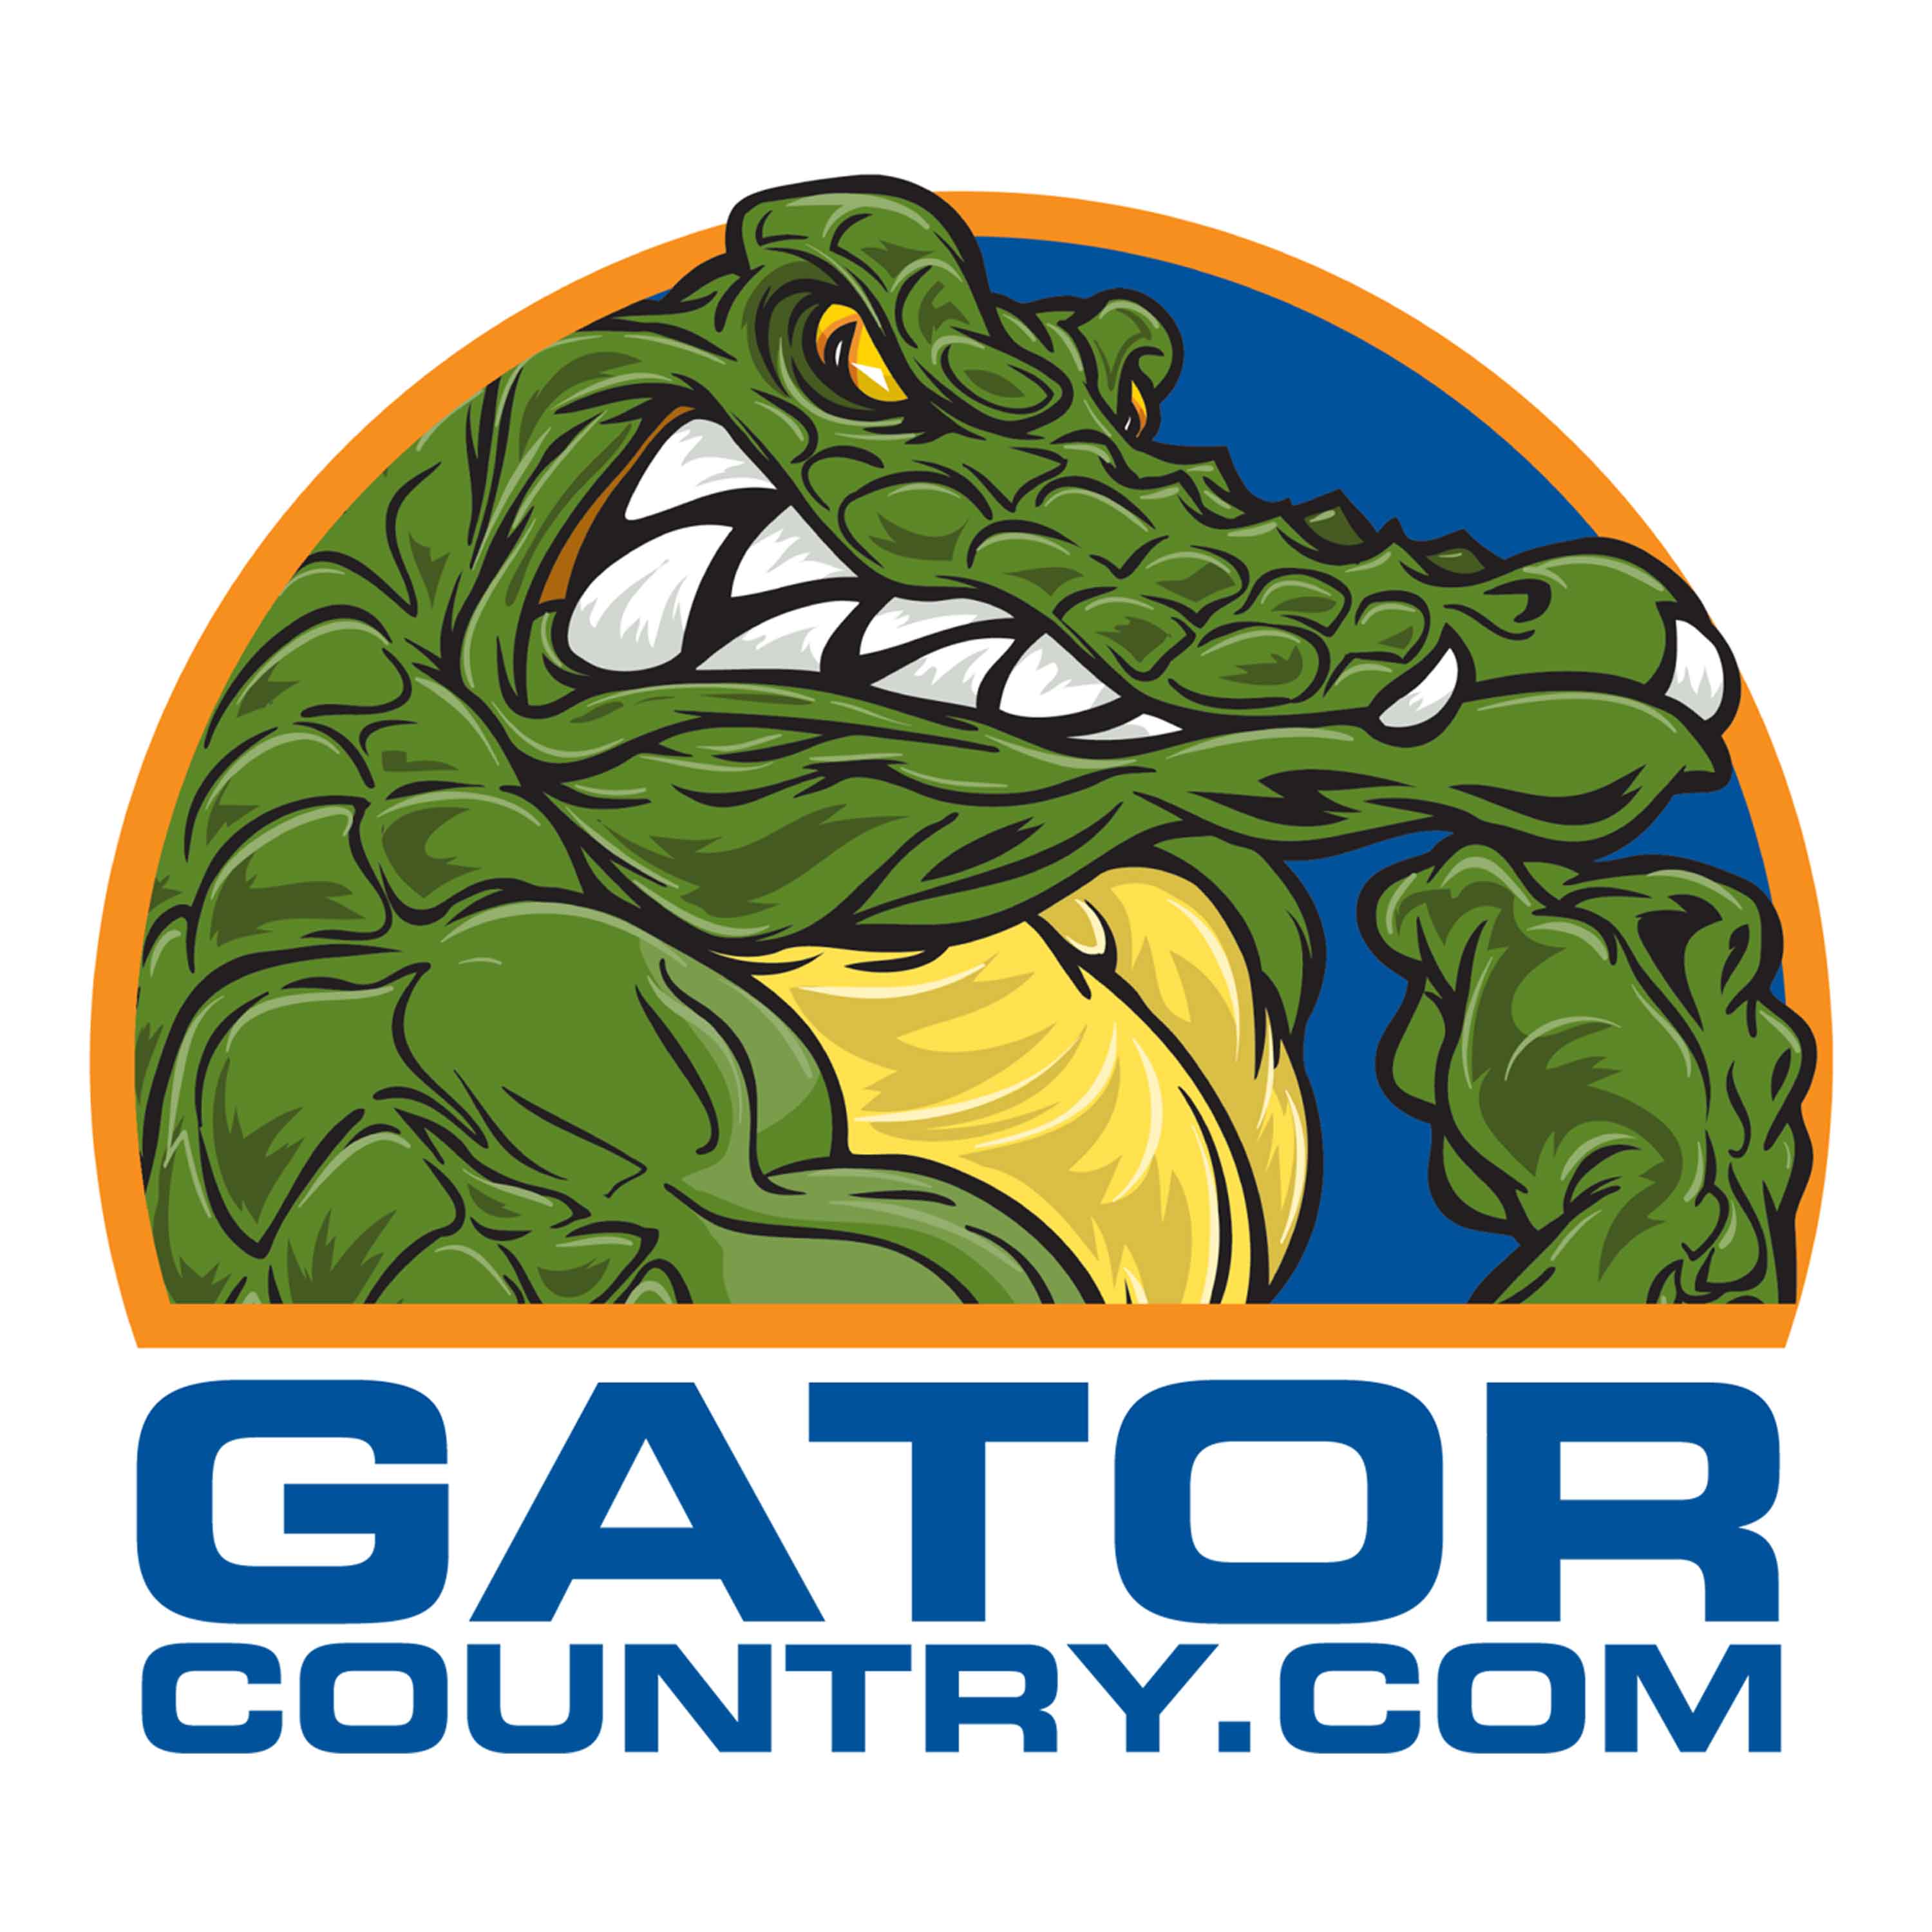 Podcast: Previewing the Florida Gators opener against FAU